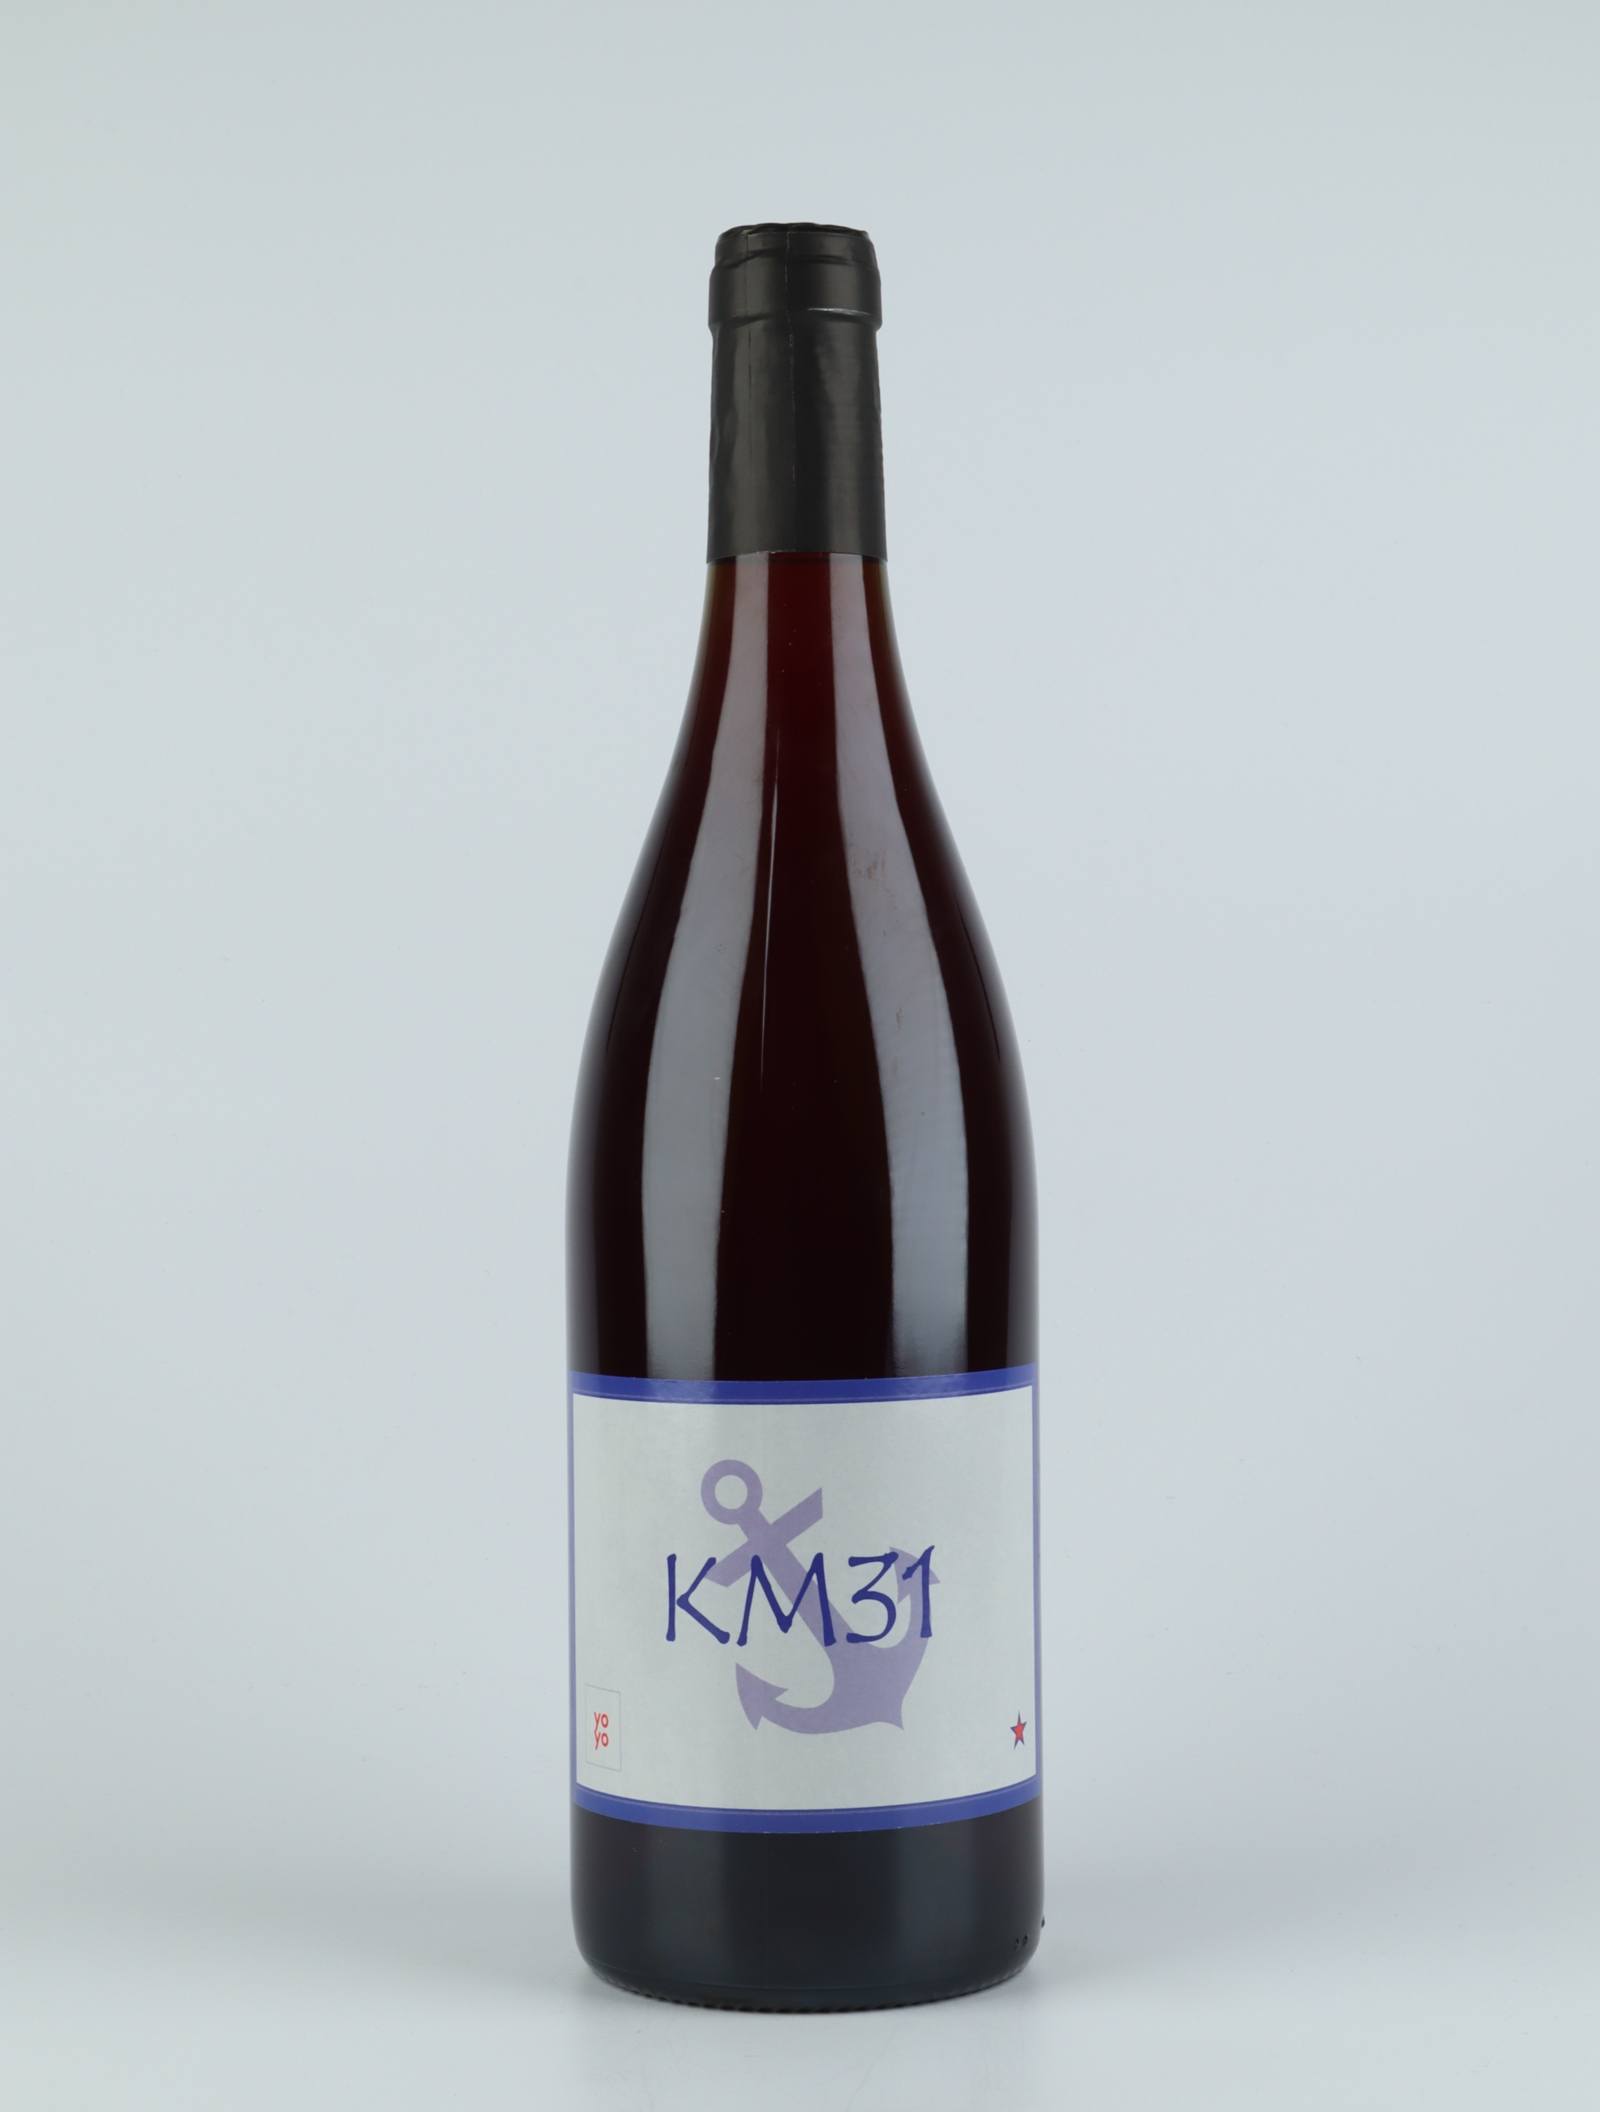 A bottle 2019 KM31 Red wine from Domaine Yoyo, Rousillon in France